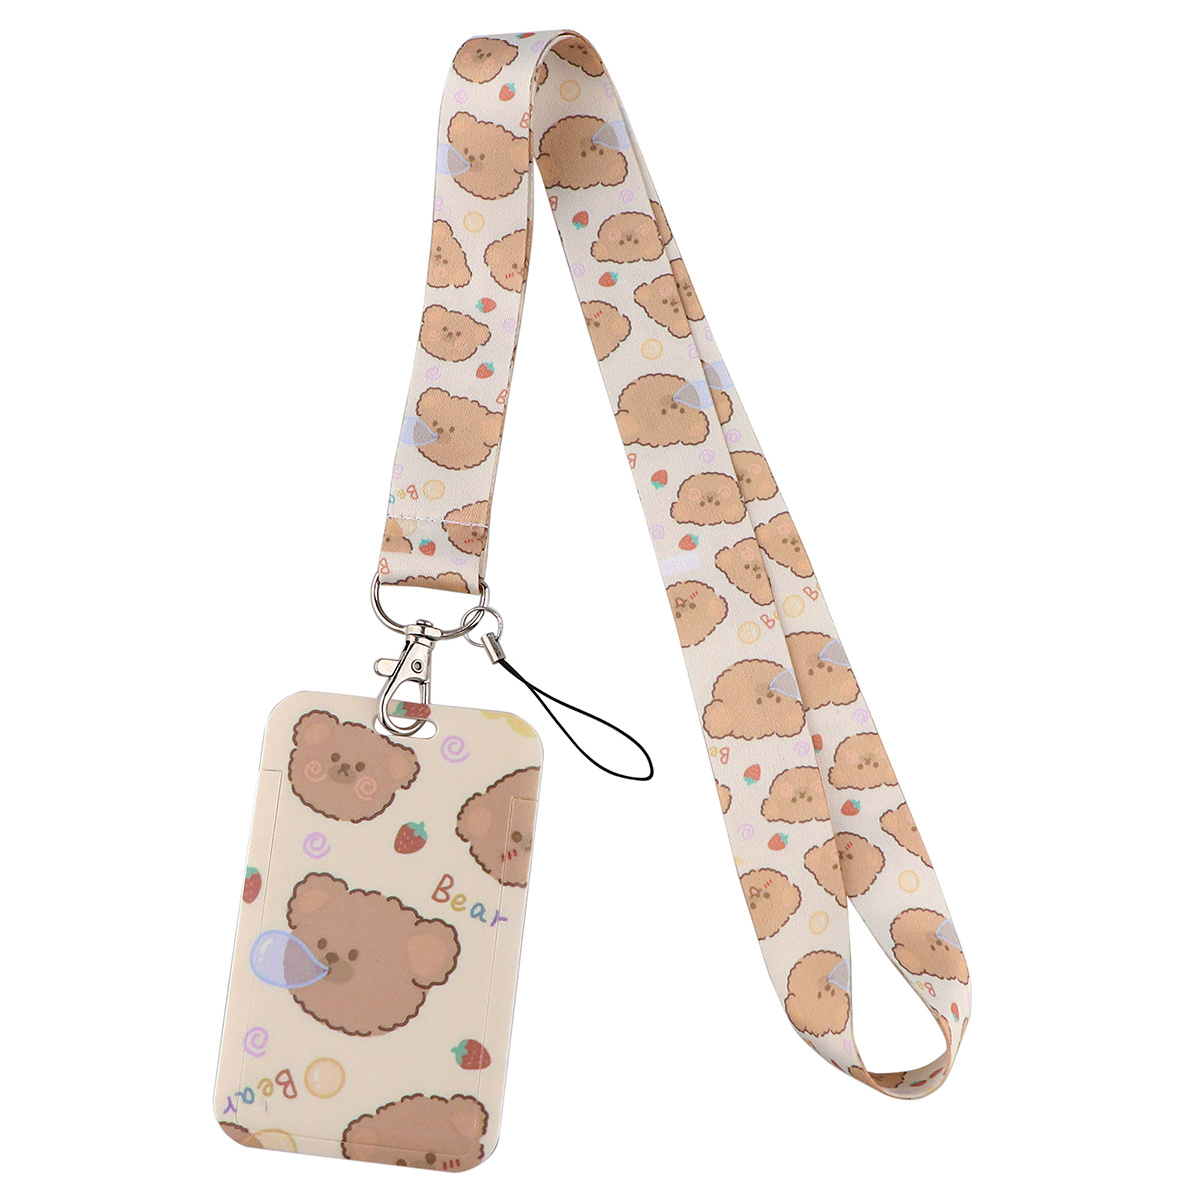 1pc Cute Cartoon Bear Neck Strap Lanyards for Keys Keychain Badge Holder ID Credit Card Pass Hang Rope Lariat Phone Charm Accessories Detachable